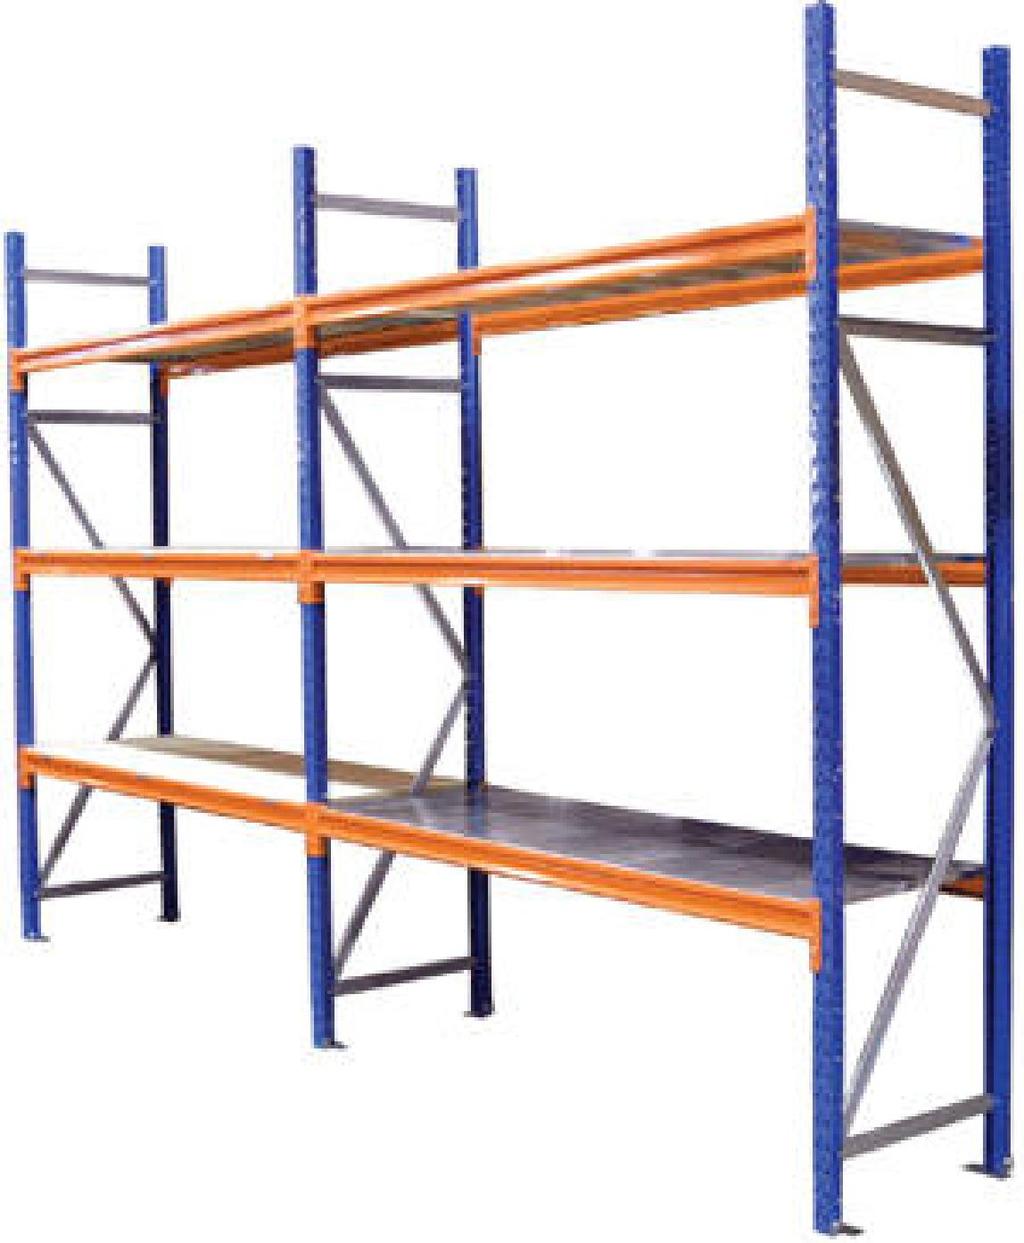 2. Longspan racking system It can be supplied with a variety of shelf types from chipboard and steel shelves to wire decking, with divider for order picking application.